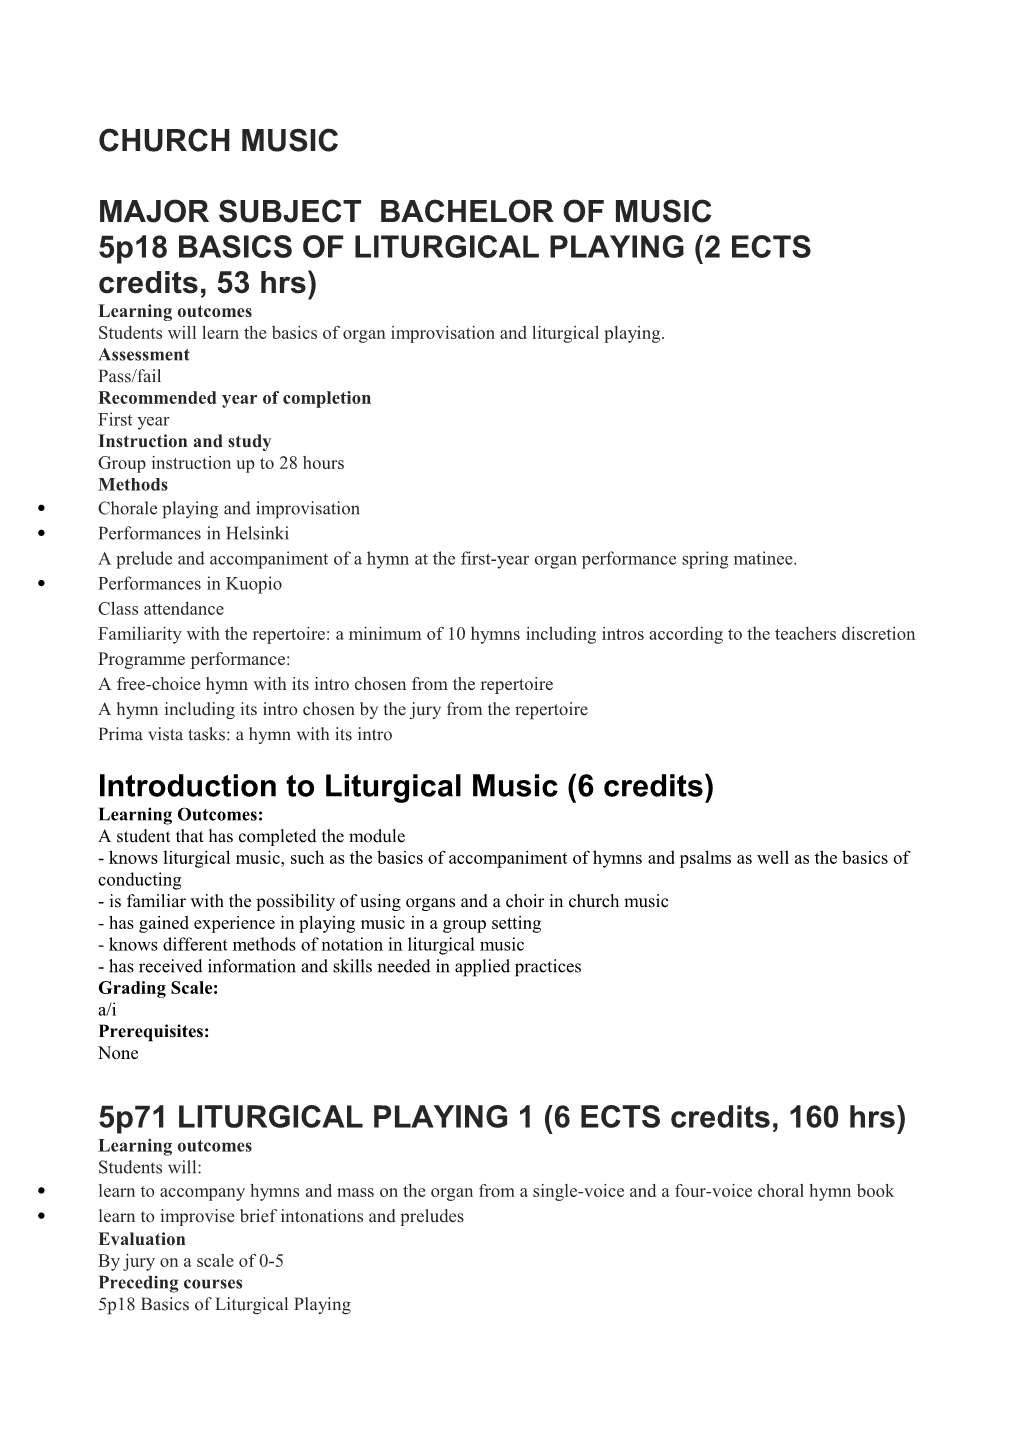 5P18 BASICS of LITURGICAL PLAYING (2 ECTS Credits, 53 Hrs)